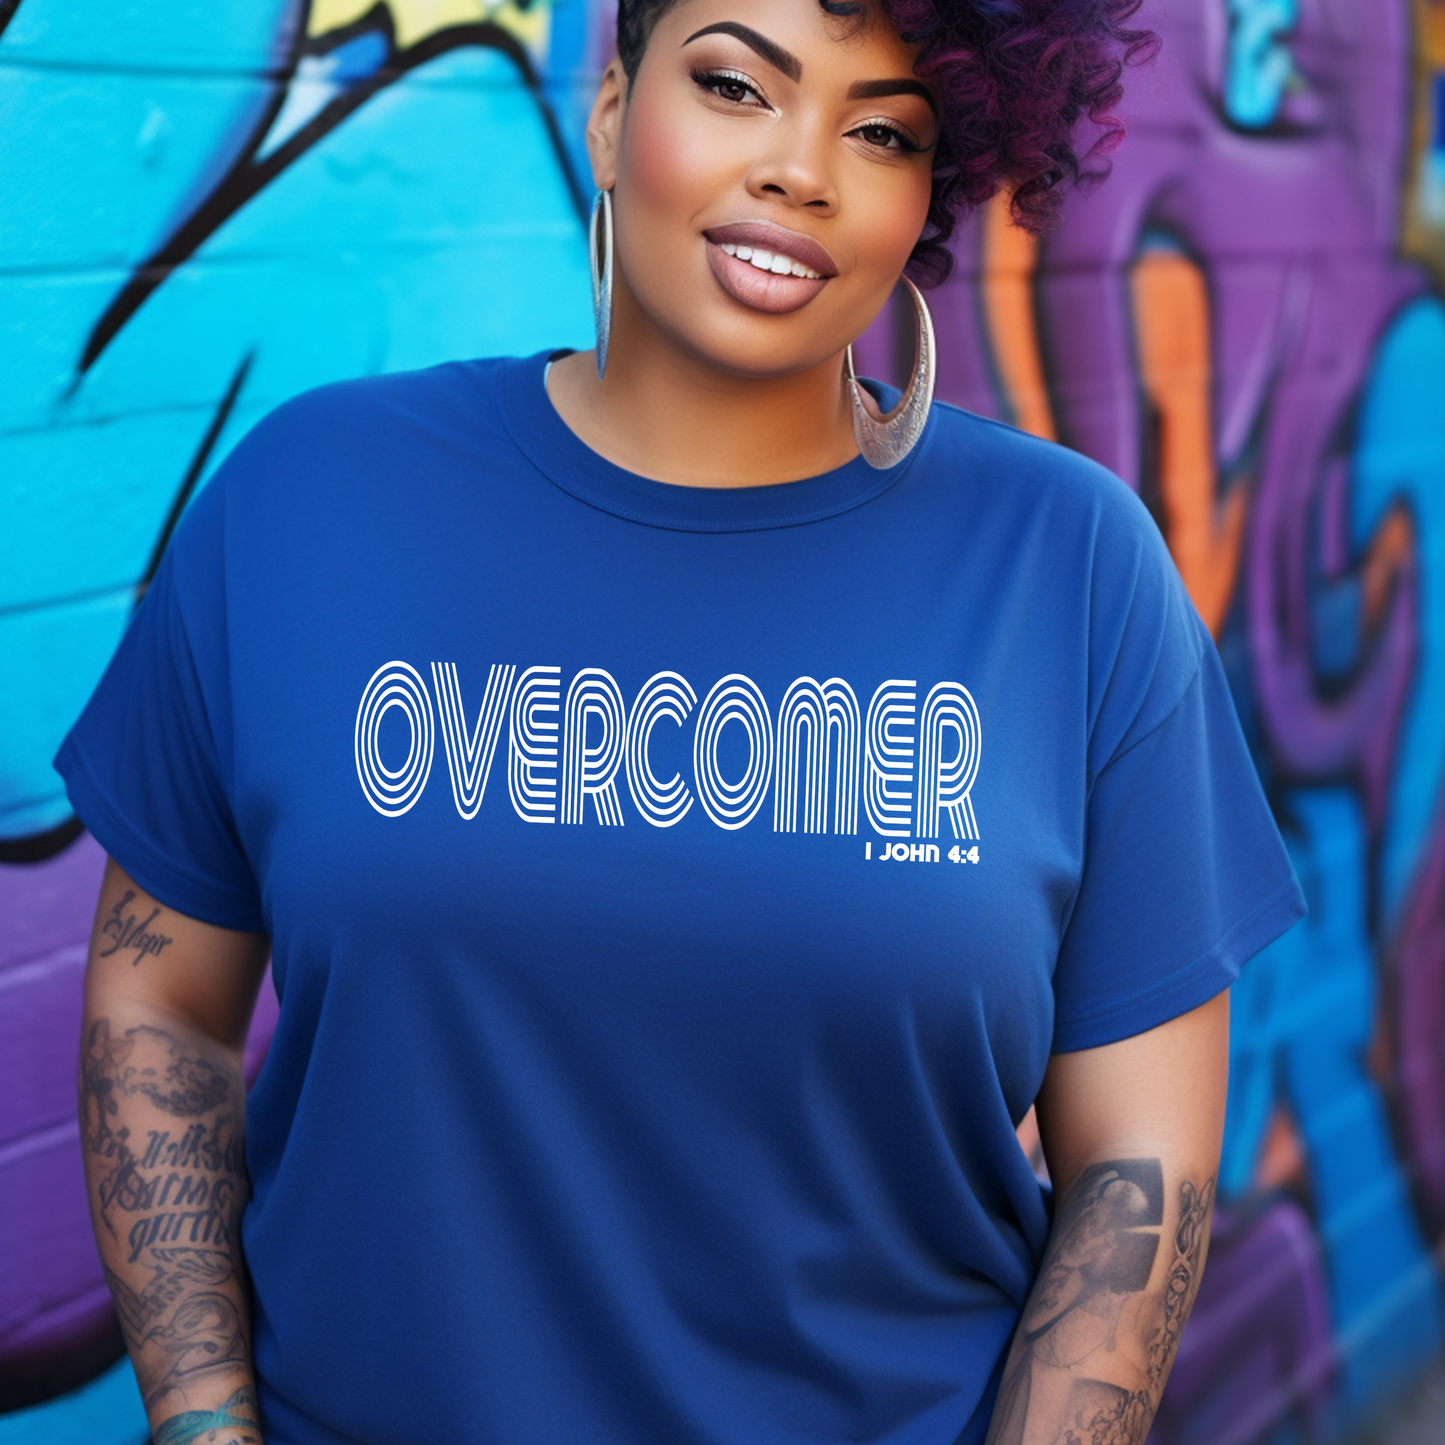 Eye-catching royal blue Overcomer t-shirt from Triumph Tees, inspired by 1 John 4:4, reinforcing our identity as overcomers through God. This faith-engraved apparel is a vibrant testament to religious strength.